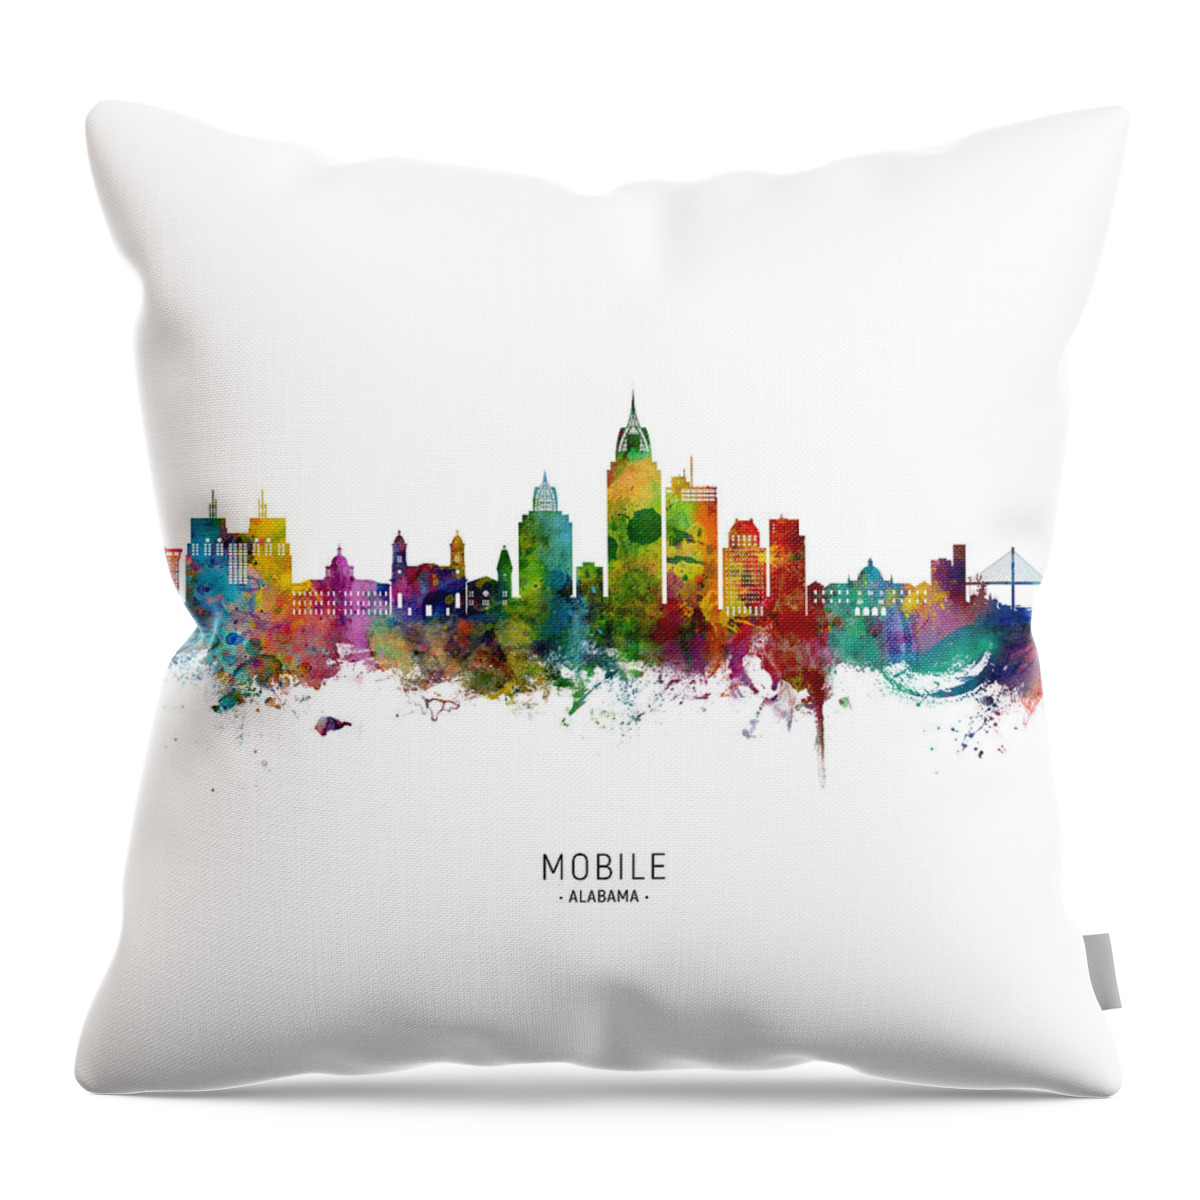 Mobile Throw Pillow featuring the digital art Mobile Alabama Skyline by Michael Tompsett